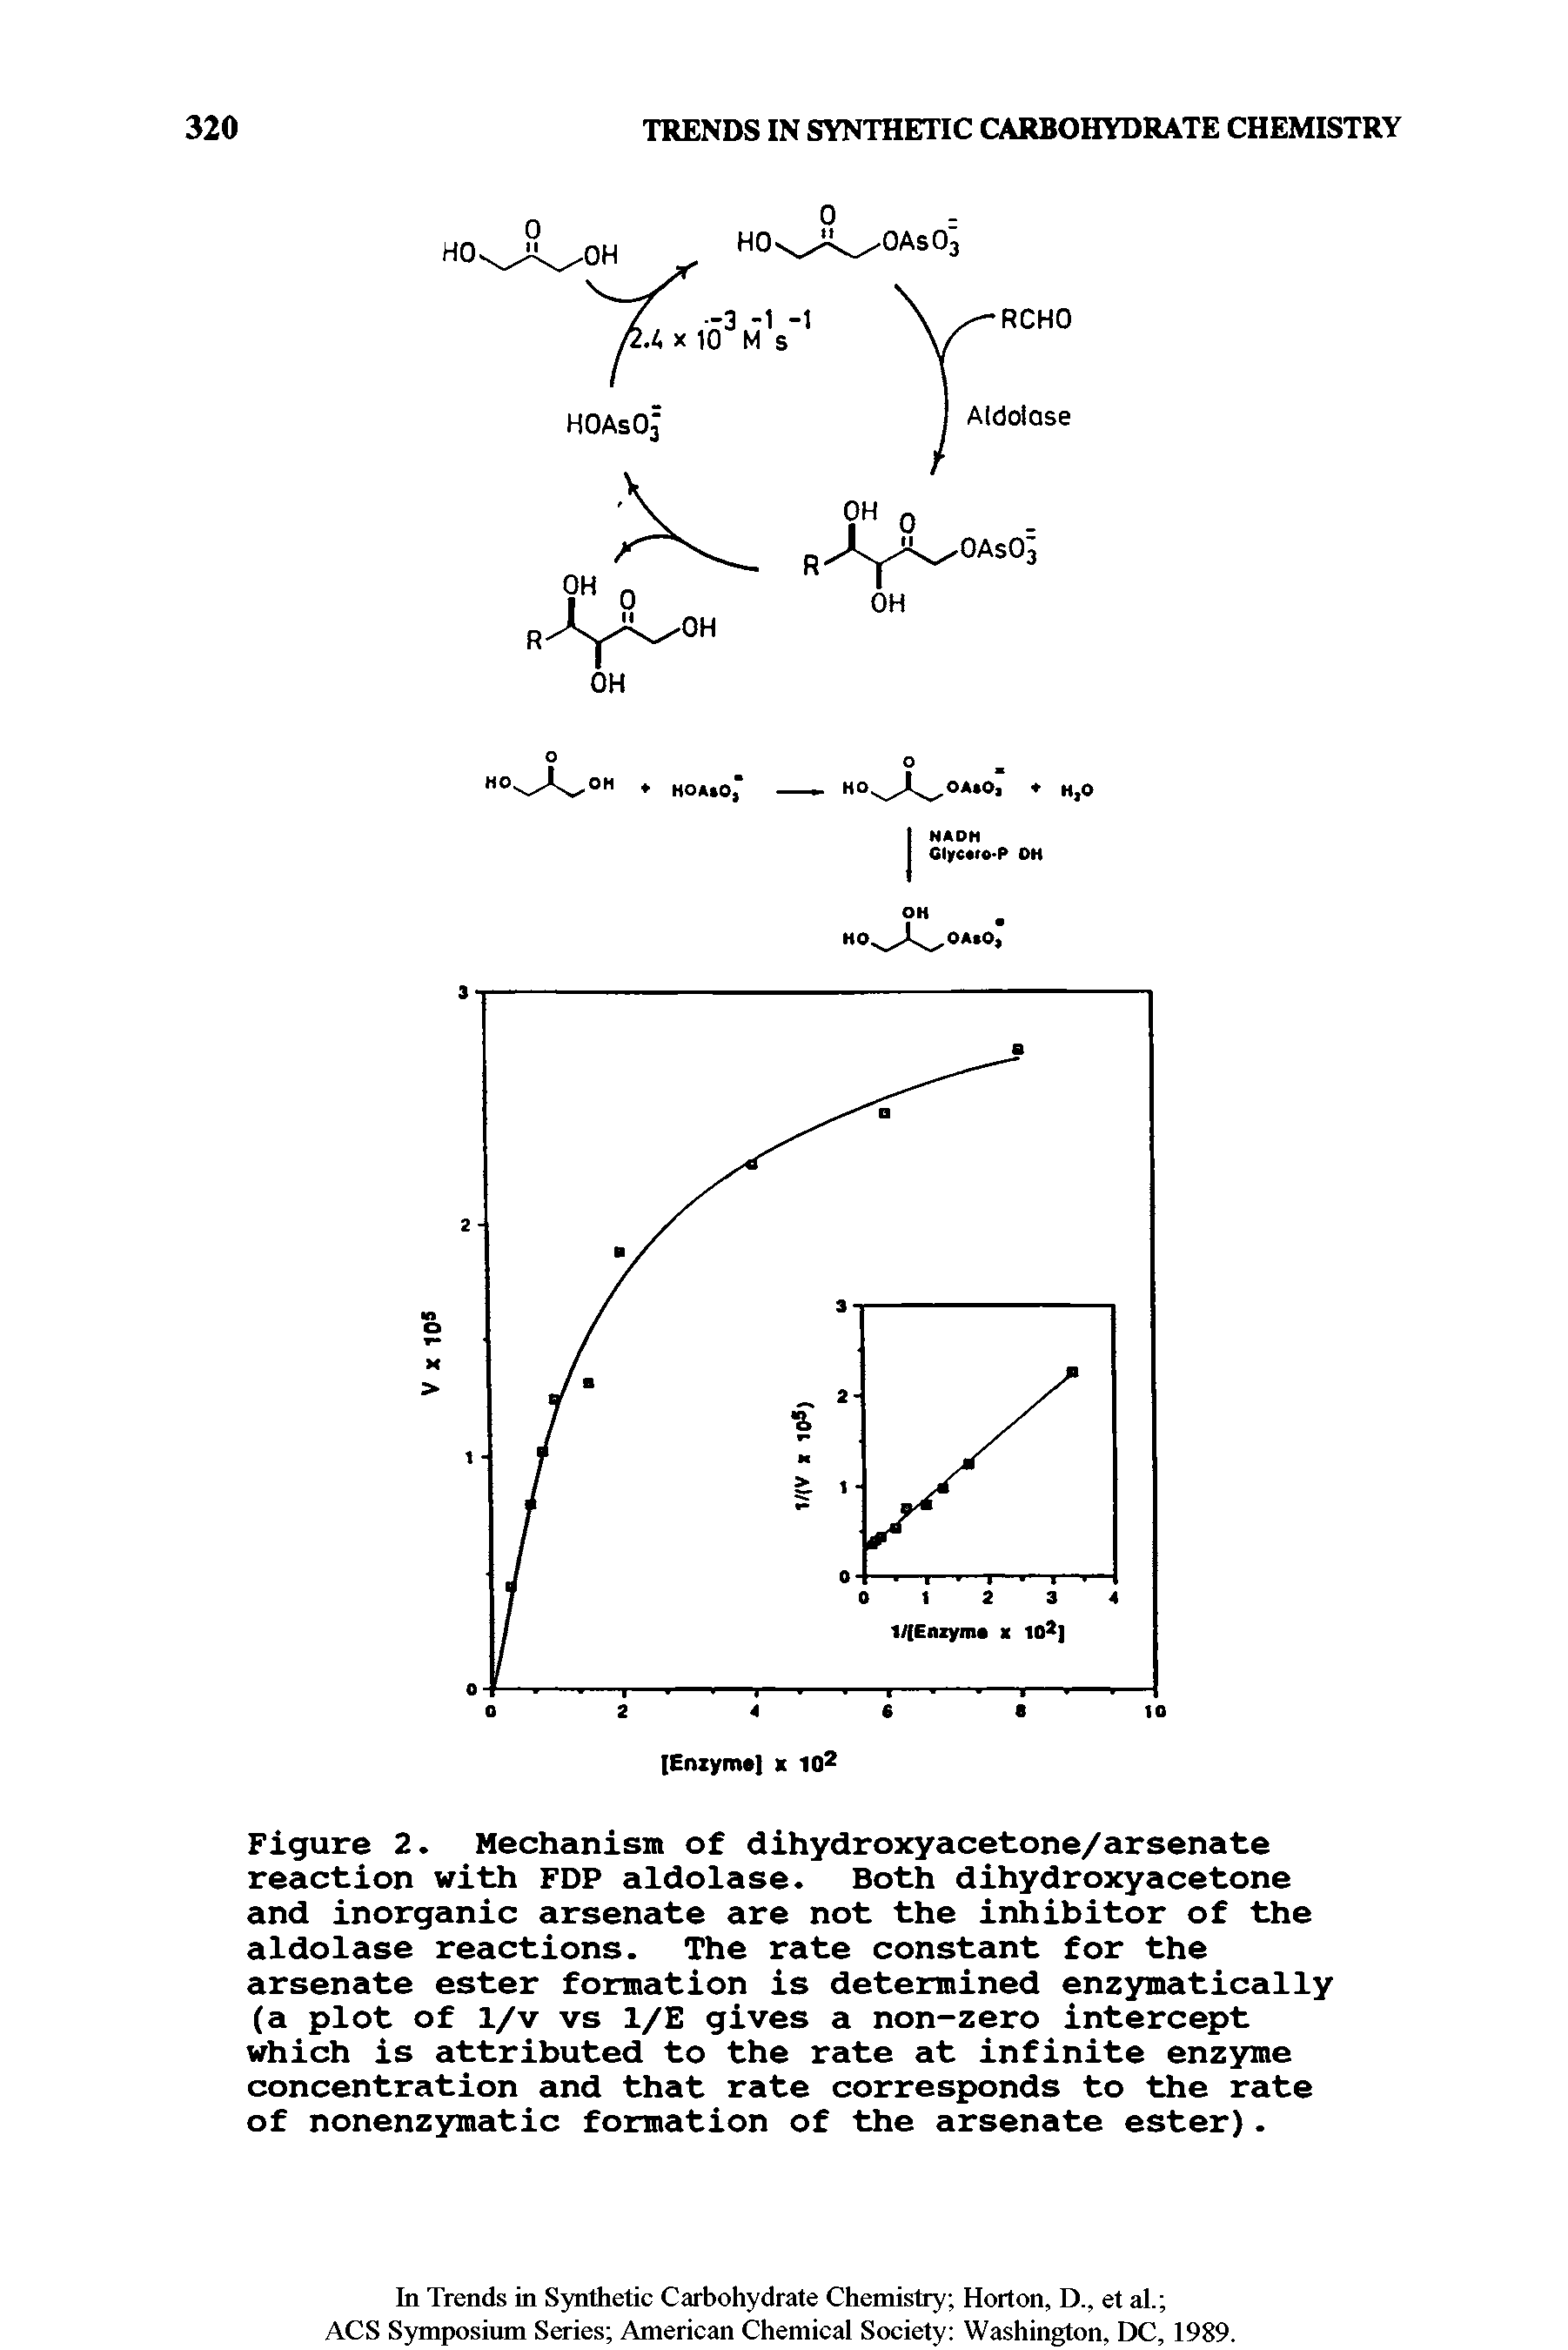 Figure 2. Mechanism of dihydroxyacetone/arsenate reaction with FDP aldolase. Both dihydroxyacetone and inorganic arsenate are not the inhibitor of the aldolase reactions. The rate constant for the arsenate ester formation is determined enzymatically (a plot of 1/v vs 1/E gives a non-zero intercept which is attributed to the rate at infinite enzyme concentration and that rate corresponds to the rate of nonenzymatic formation of the arsenate ester).